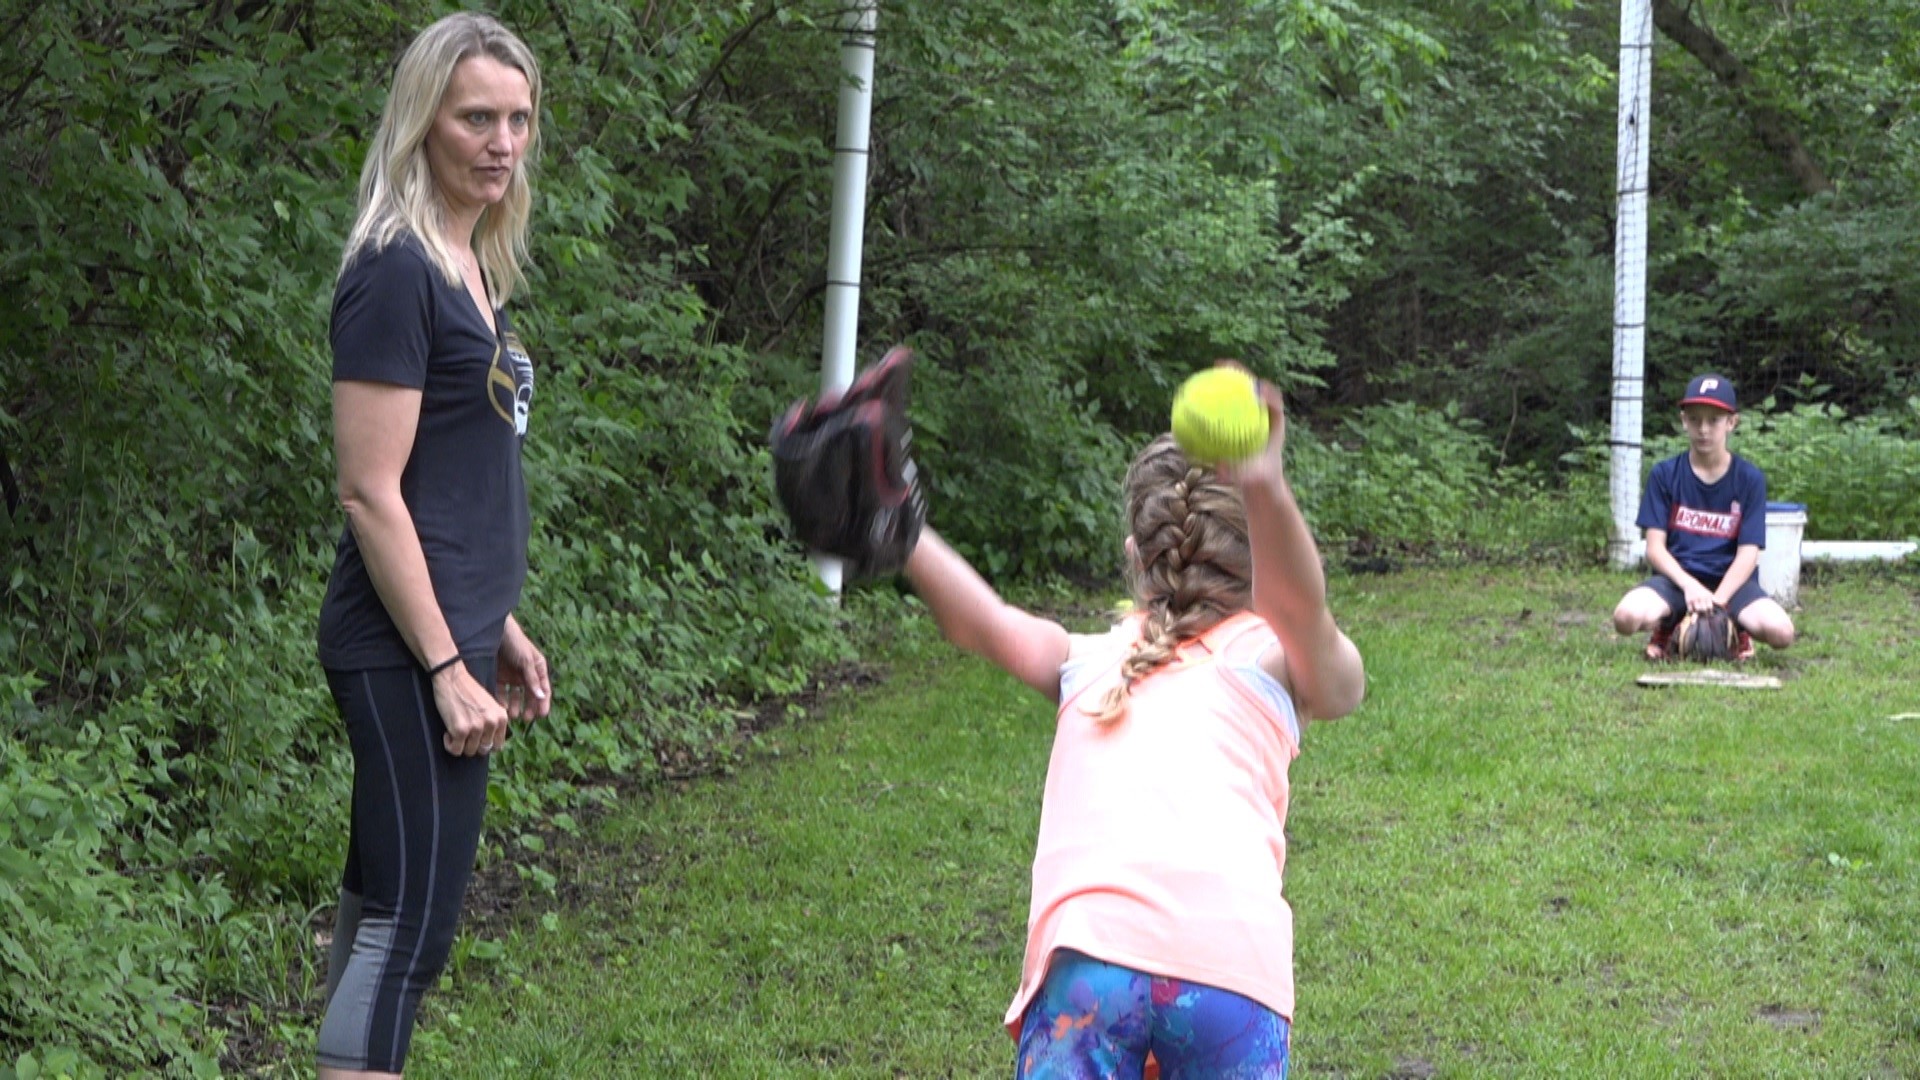 A former Mizzou pitcher spent years working as a part-time, private pitching coach for young girls out of her childhood home, until the HOA threatened to sue.